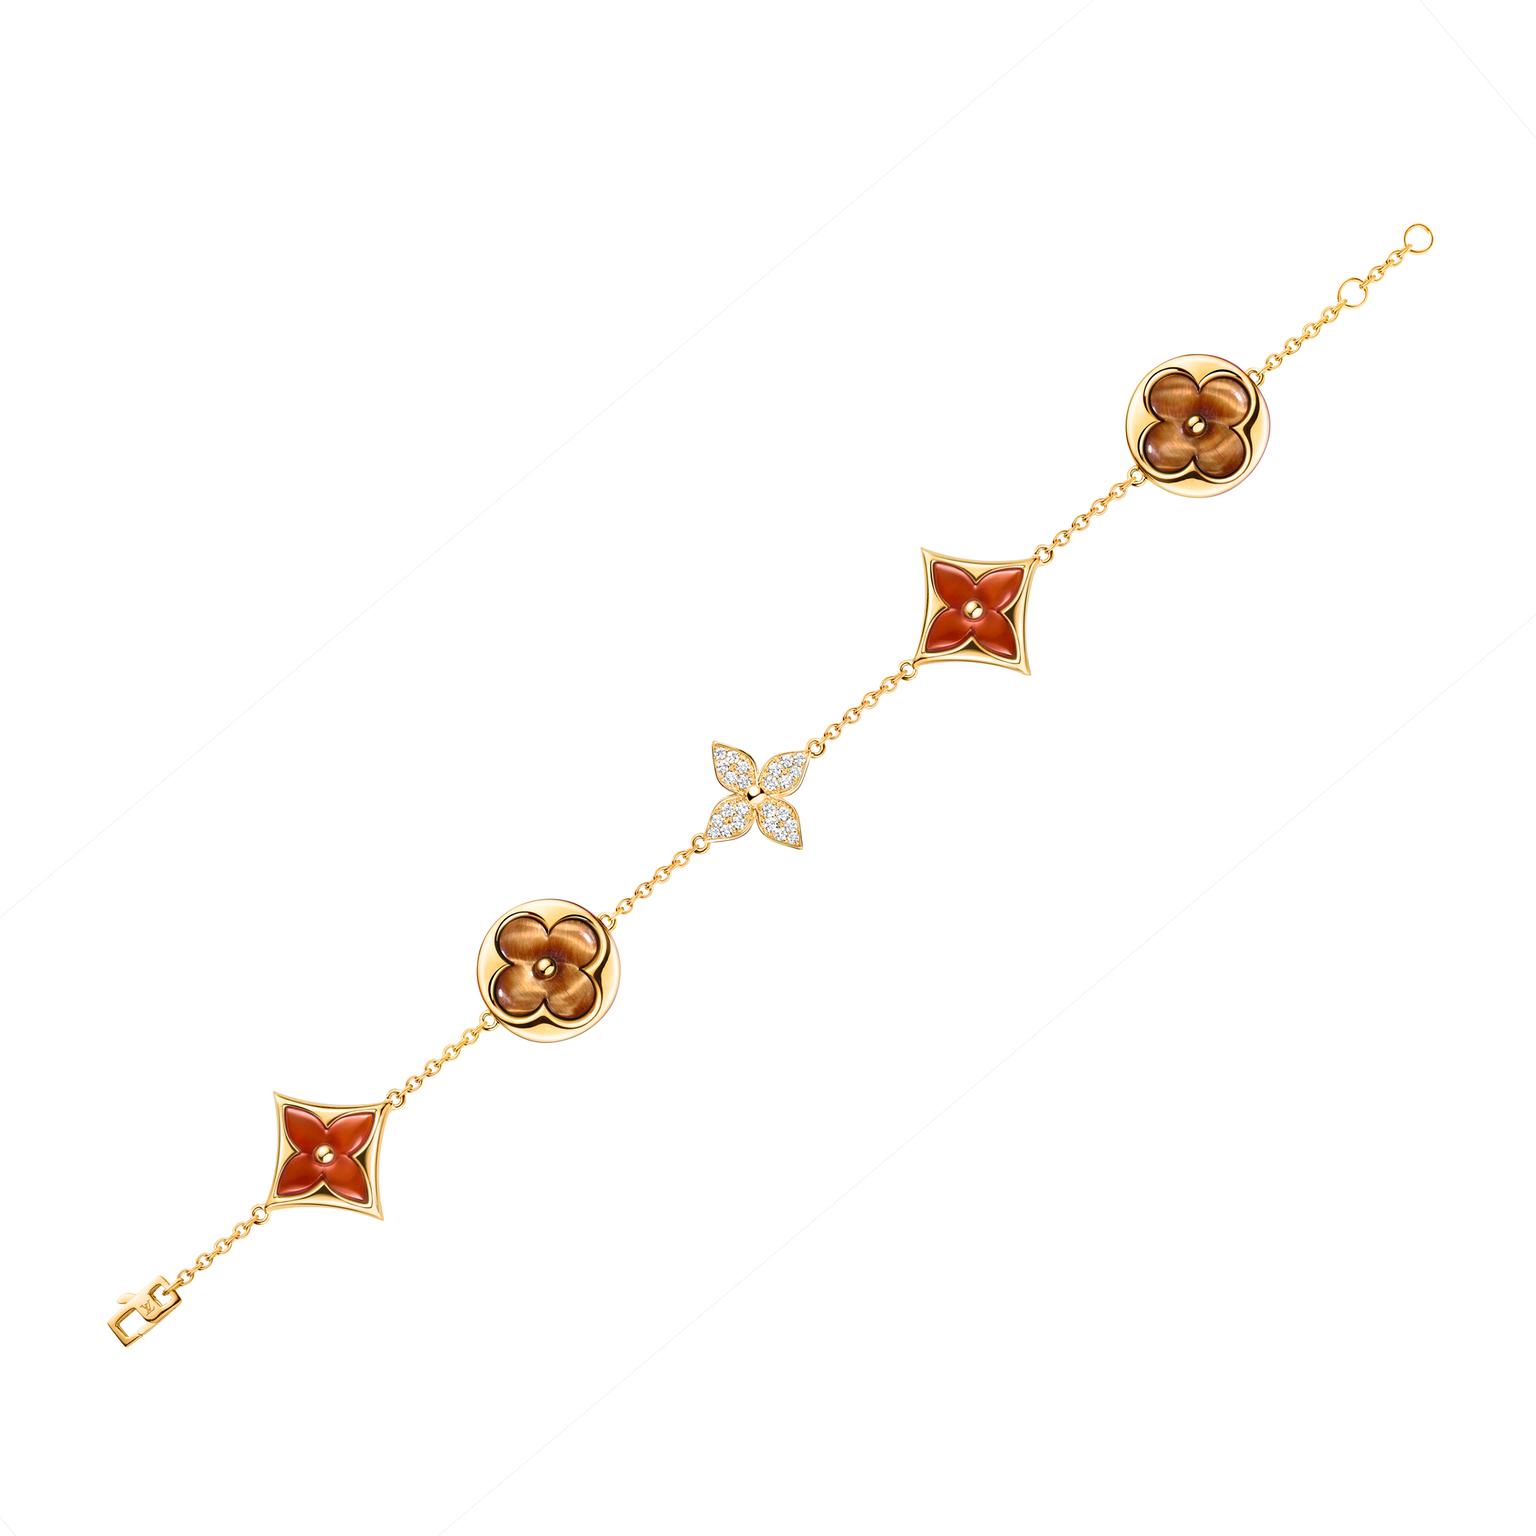 Blossom tiger’s eye and carnelian bracelet | Louis Vuitton | The Jewellery Editor